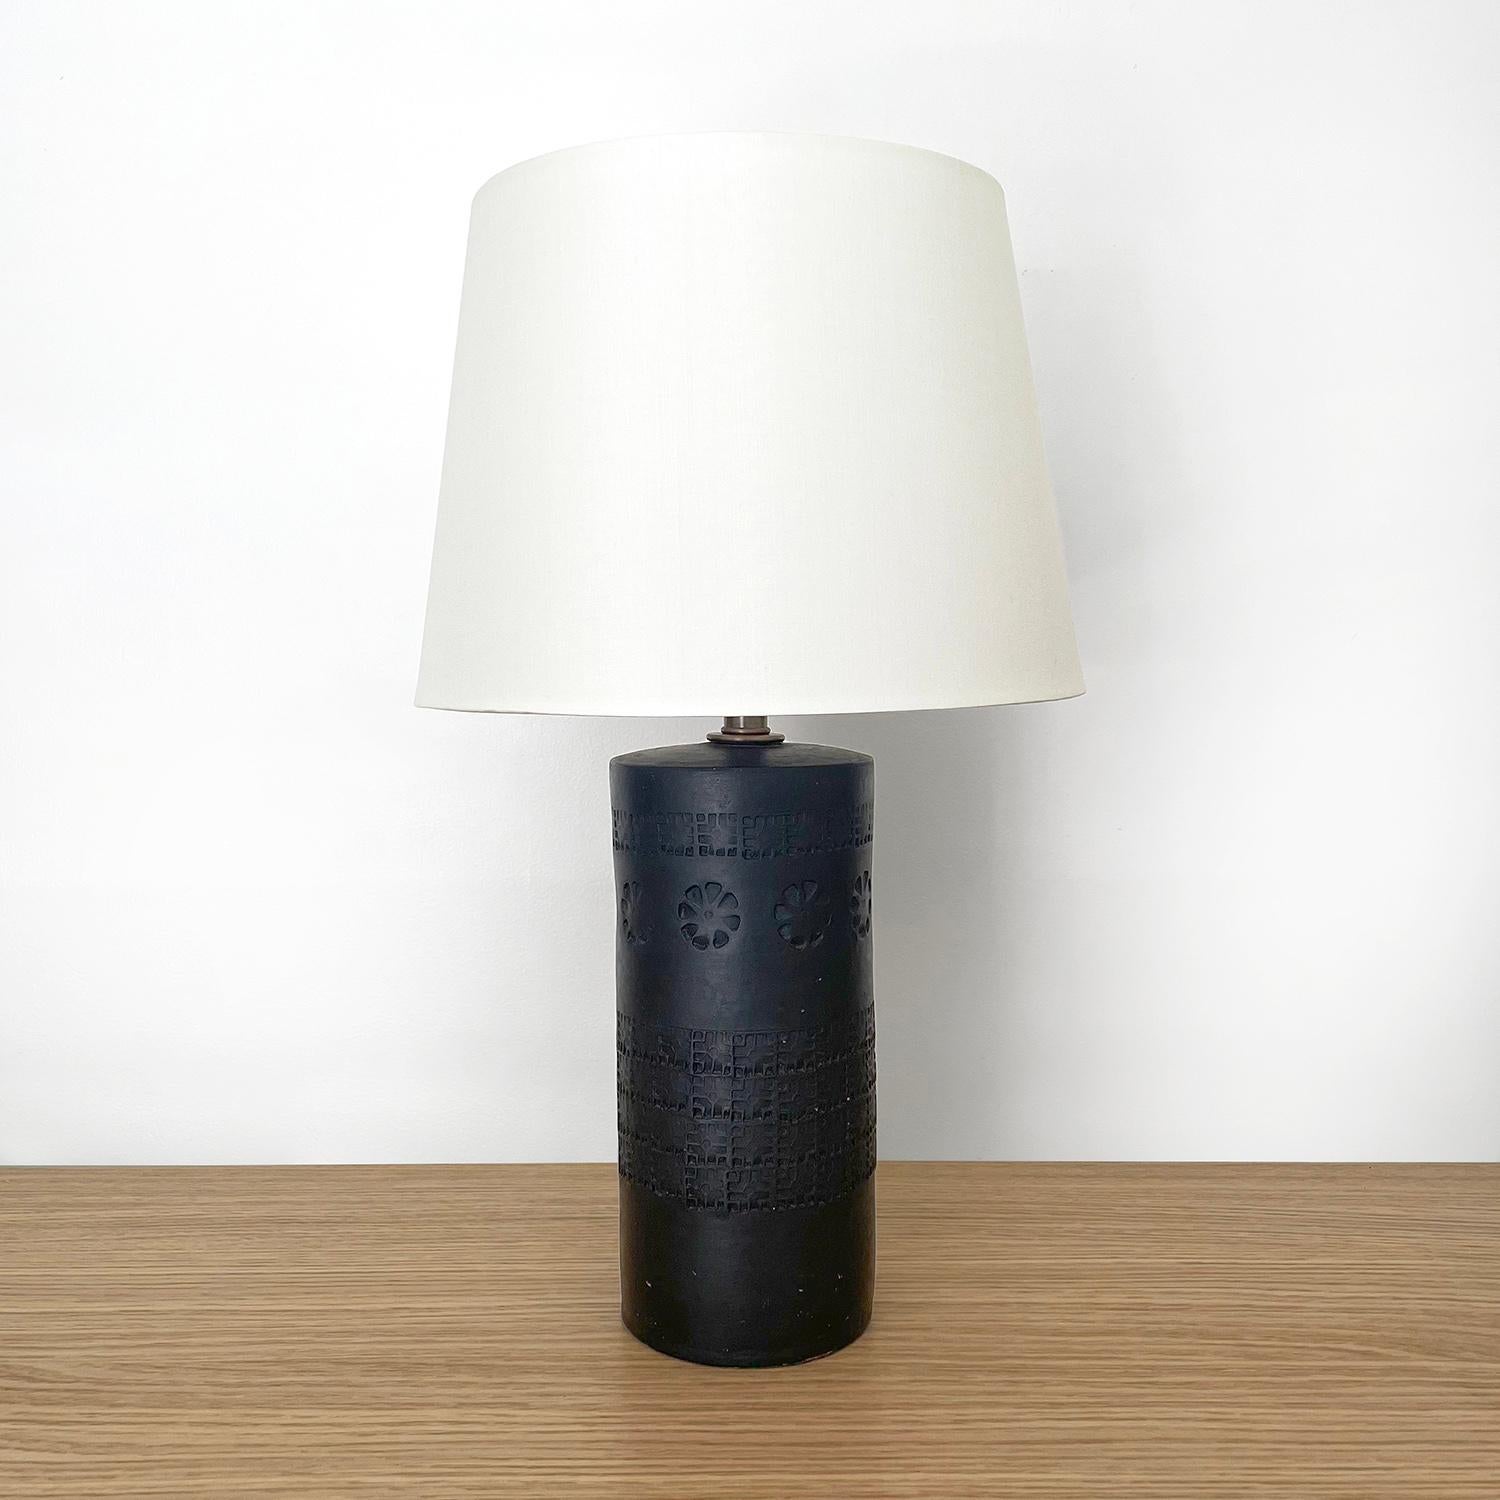 Aldo Londi table lamp 
Italy, circa 1960s
Manufactured by Bitossi
This piece is a timeless Classic 
Organic composition and feel
Matte black stamped terracotta lamp base has minor loss of exterior coating in places
Each reveals a warm pink hue